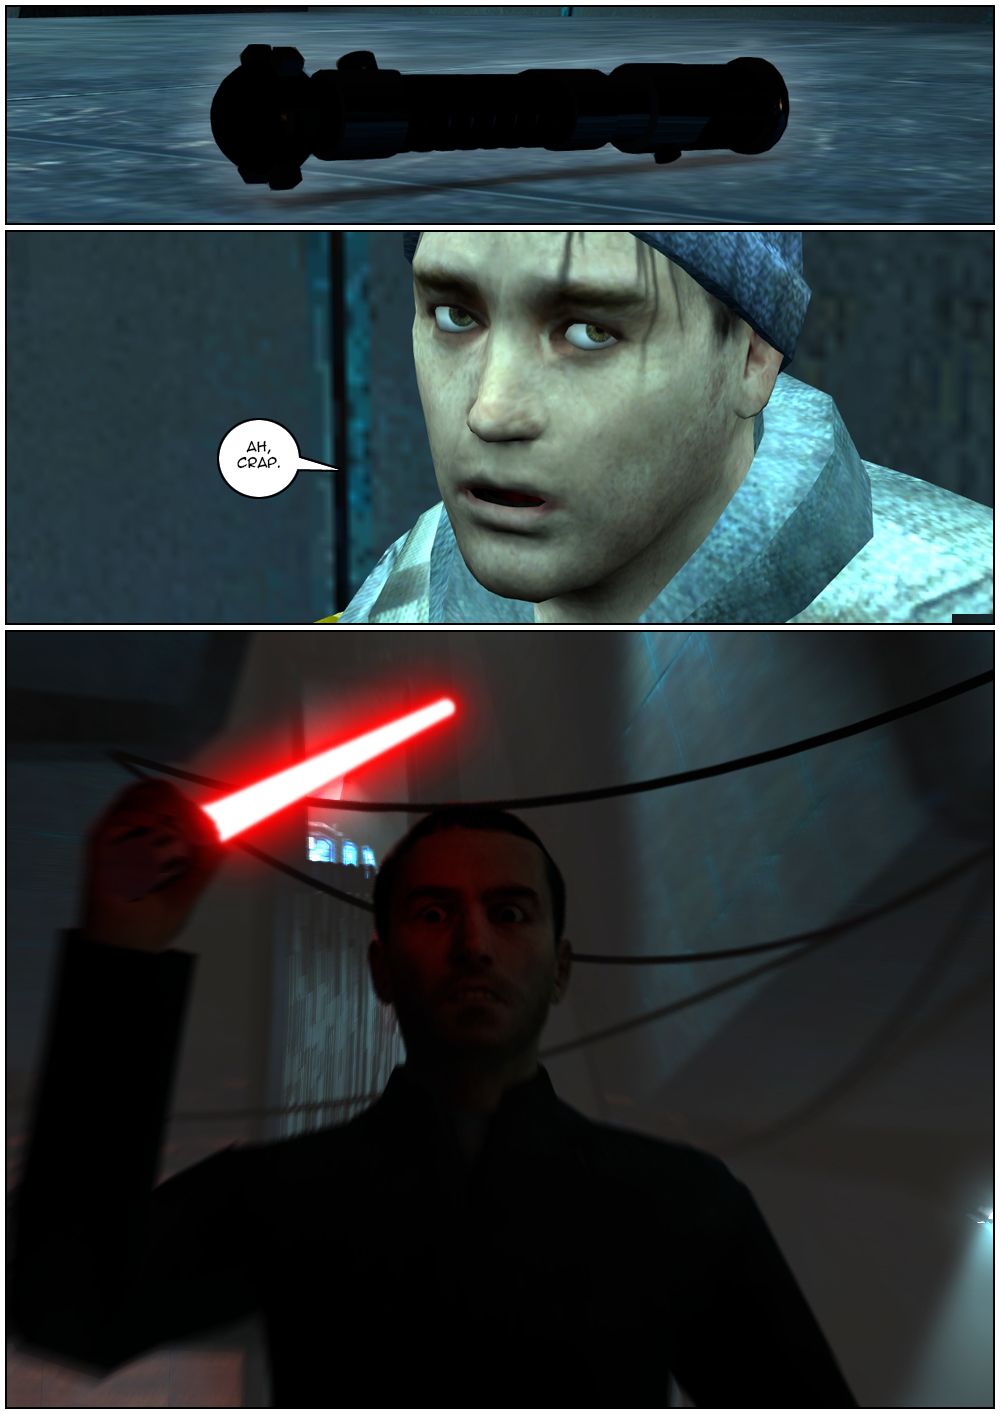 The lightsaber gains a faint glow as Delirium tries to pull it with the Force. Delirium then looks to the side and says ah, crap. Mythos jumps at him with his red lightsaber raised, prepared to strike.